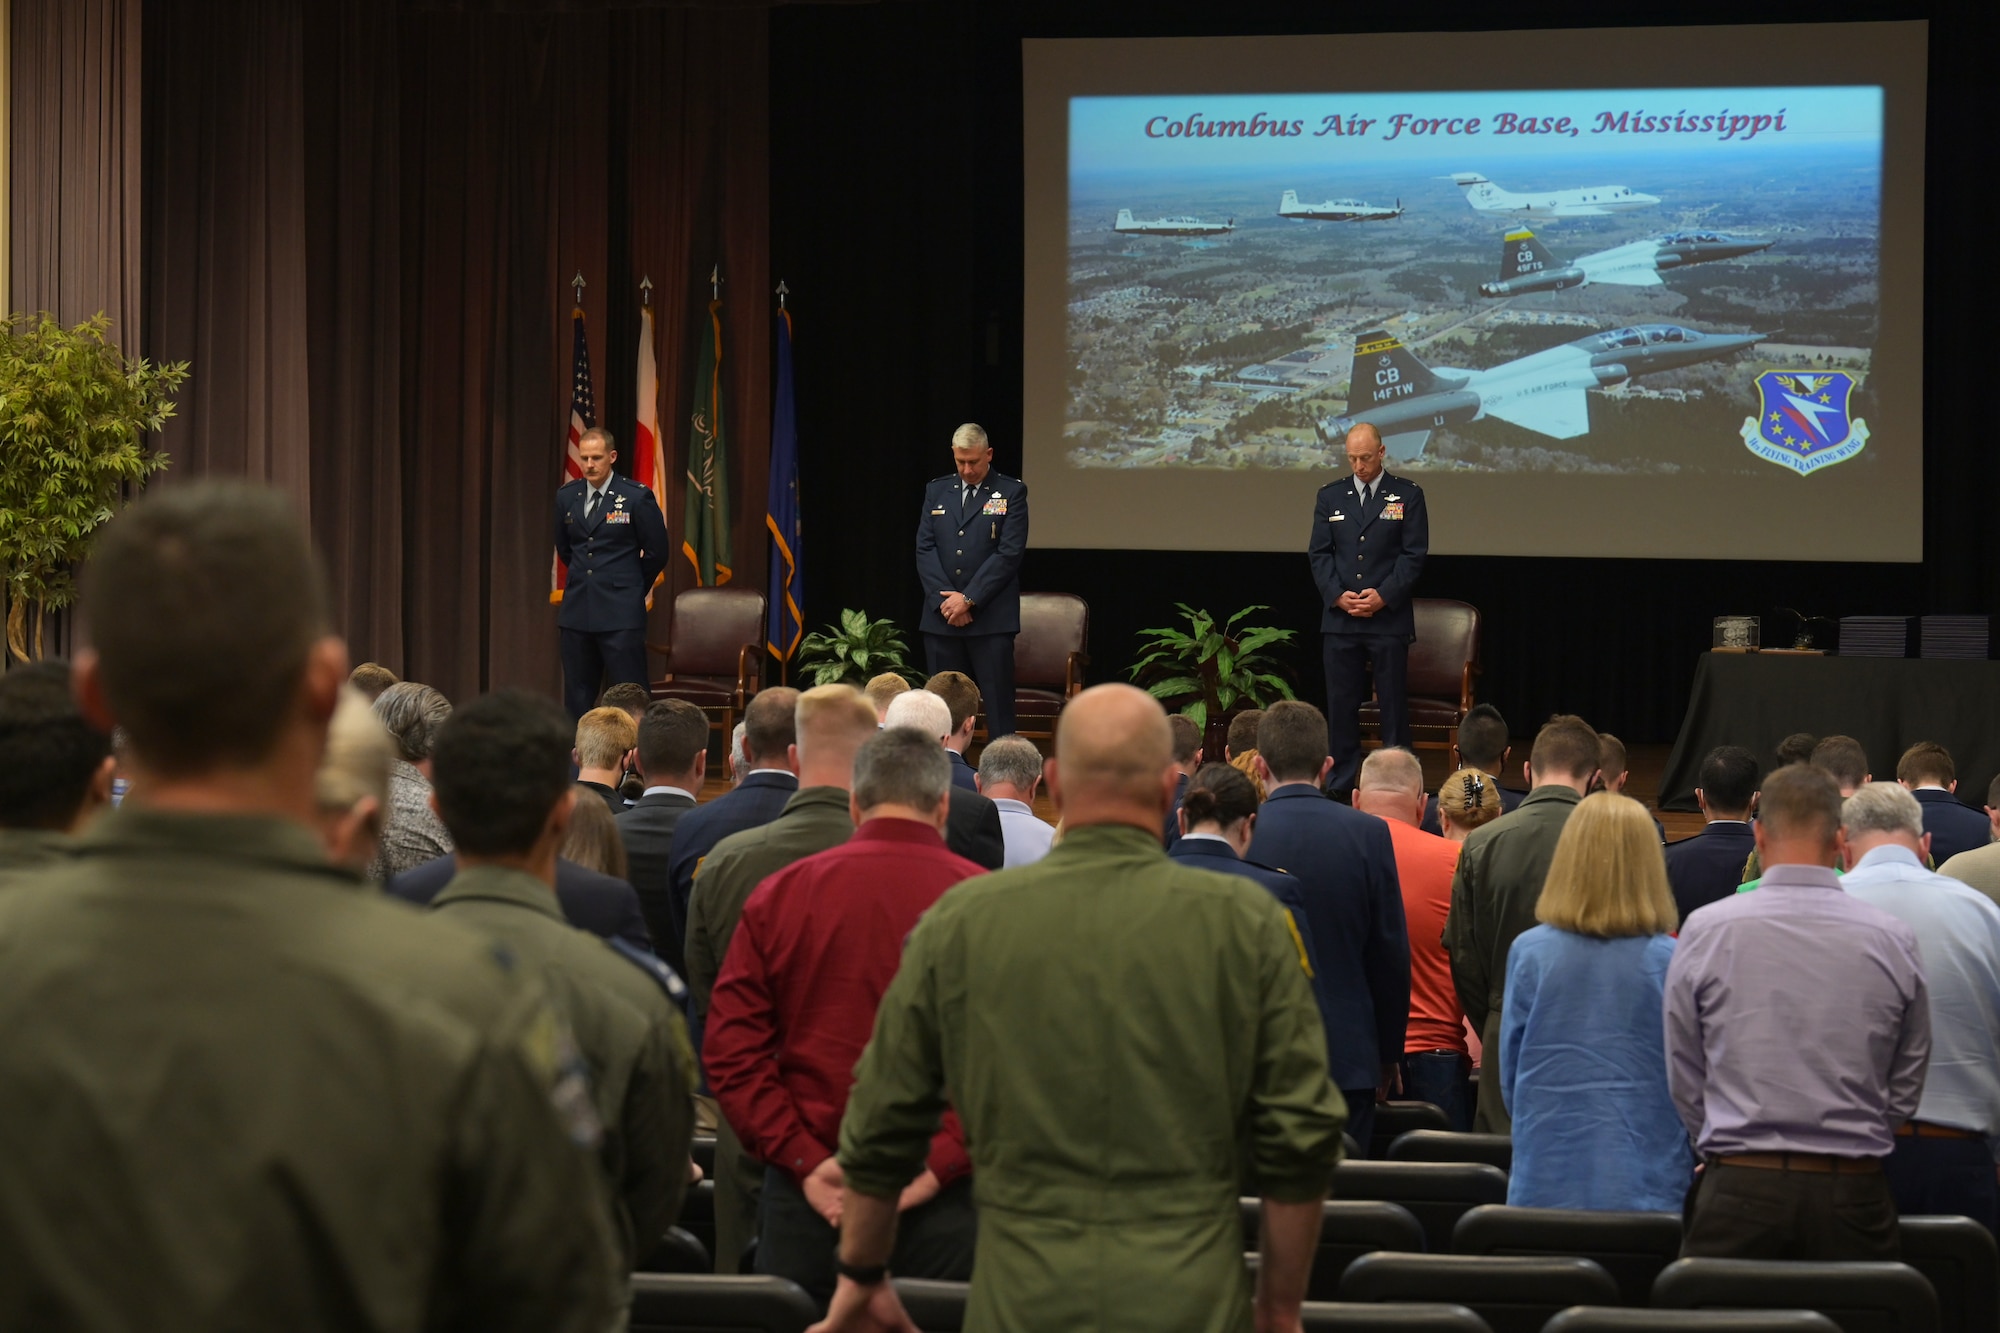 The official party and audience members attending the graduation of Specialized Undergraduate Pilot Training class 21-10 lower their heads in prayer May 27, 2021, on Columbus Air Force Base, Miss. The 21 graduates completed a 52-week pilot training program including academics, physiological training, and flight training in the T-6A Texan II, T-1A Jayhawk, and T-38C Talon. (U.S. Air Force photo by Senior Airman Jake Jacobsen)